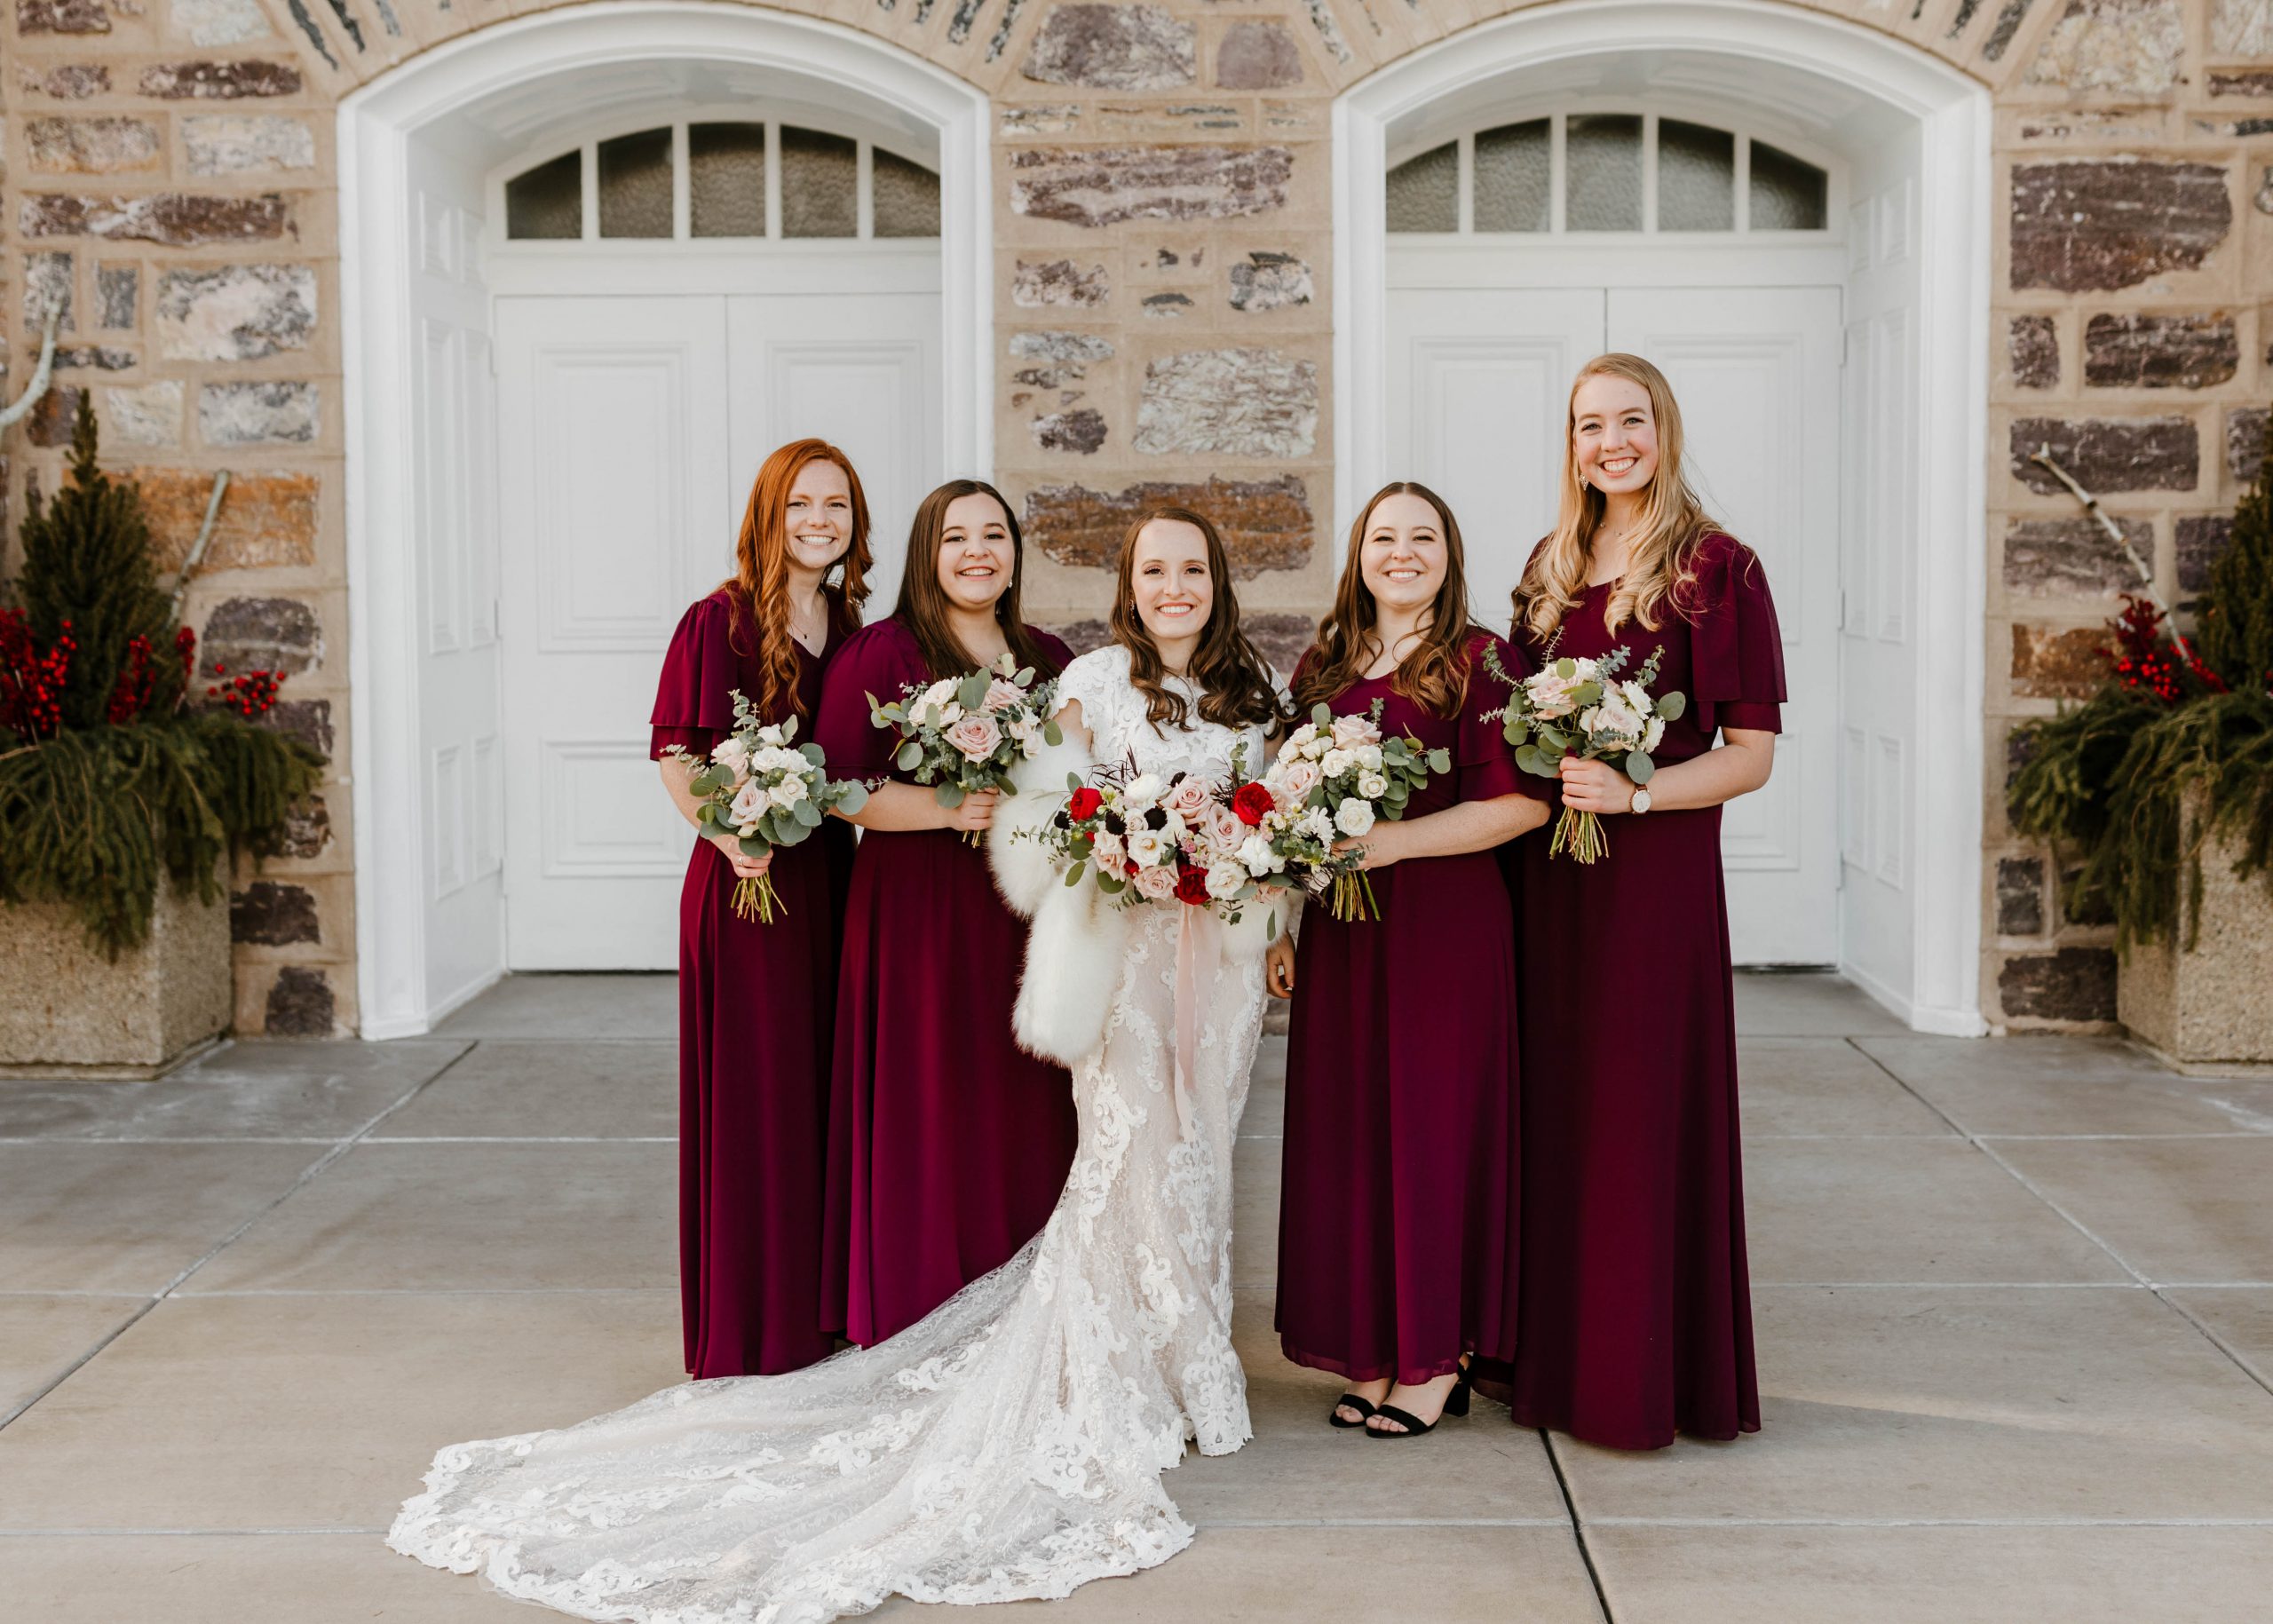 Real Bride Wearing Maggie Sottero Wedding Dress at Winter Wedding with Bridesmaids Wearing Berry Tone Dresses